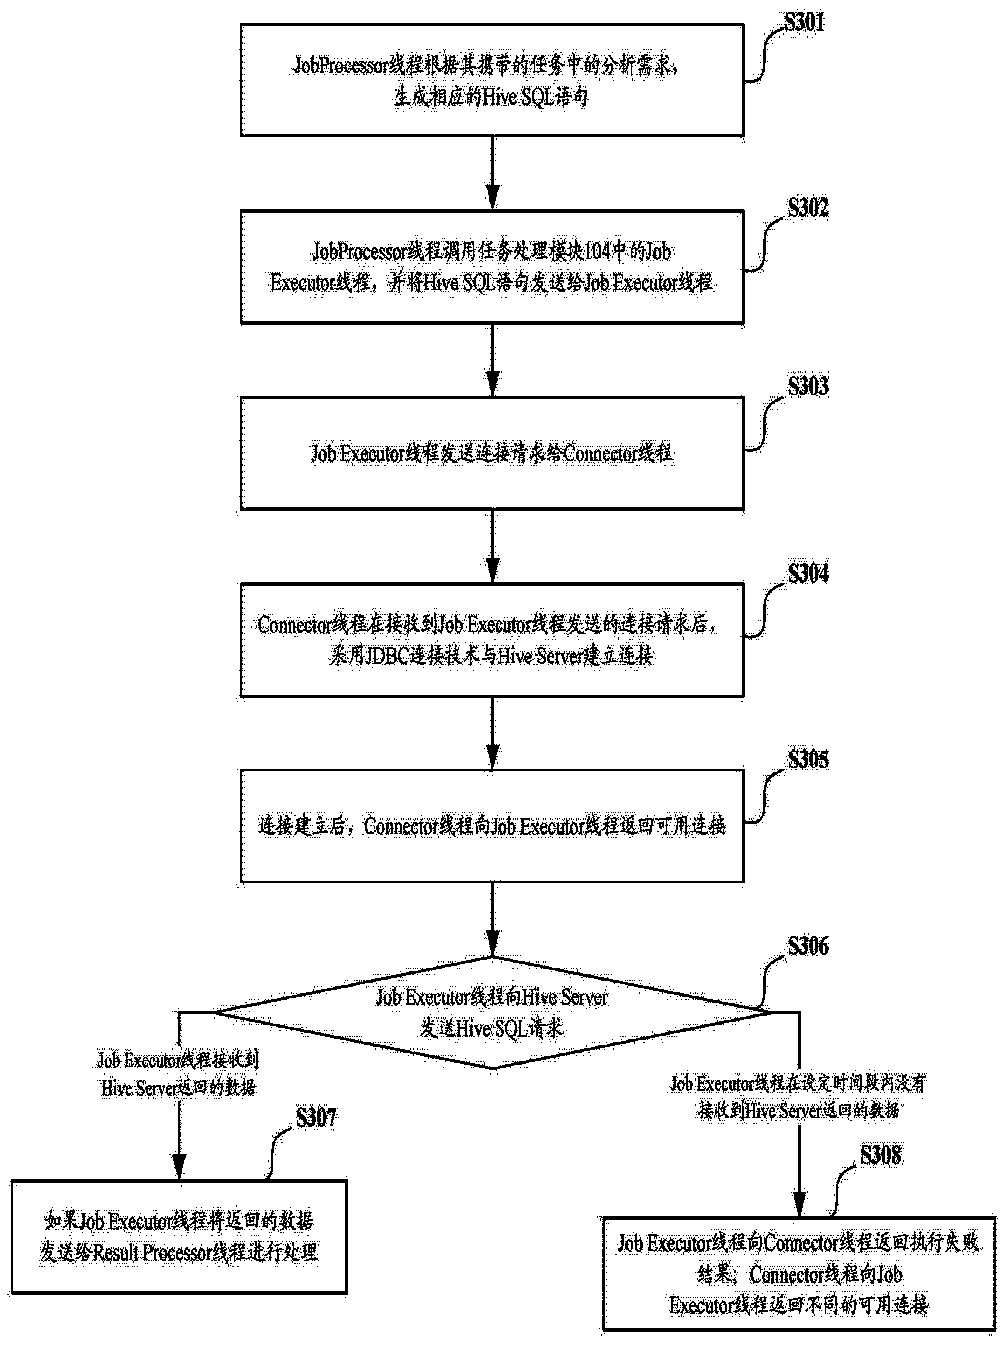 Enterprise management data analyzing and processing system and method